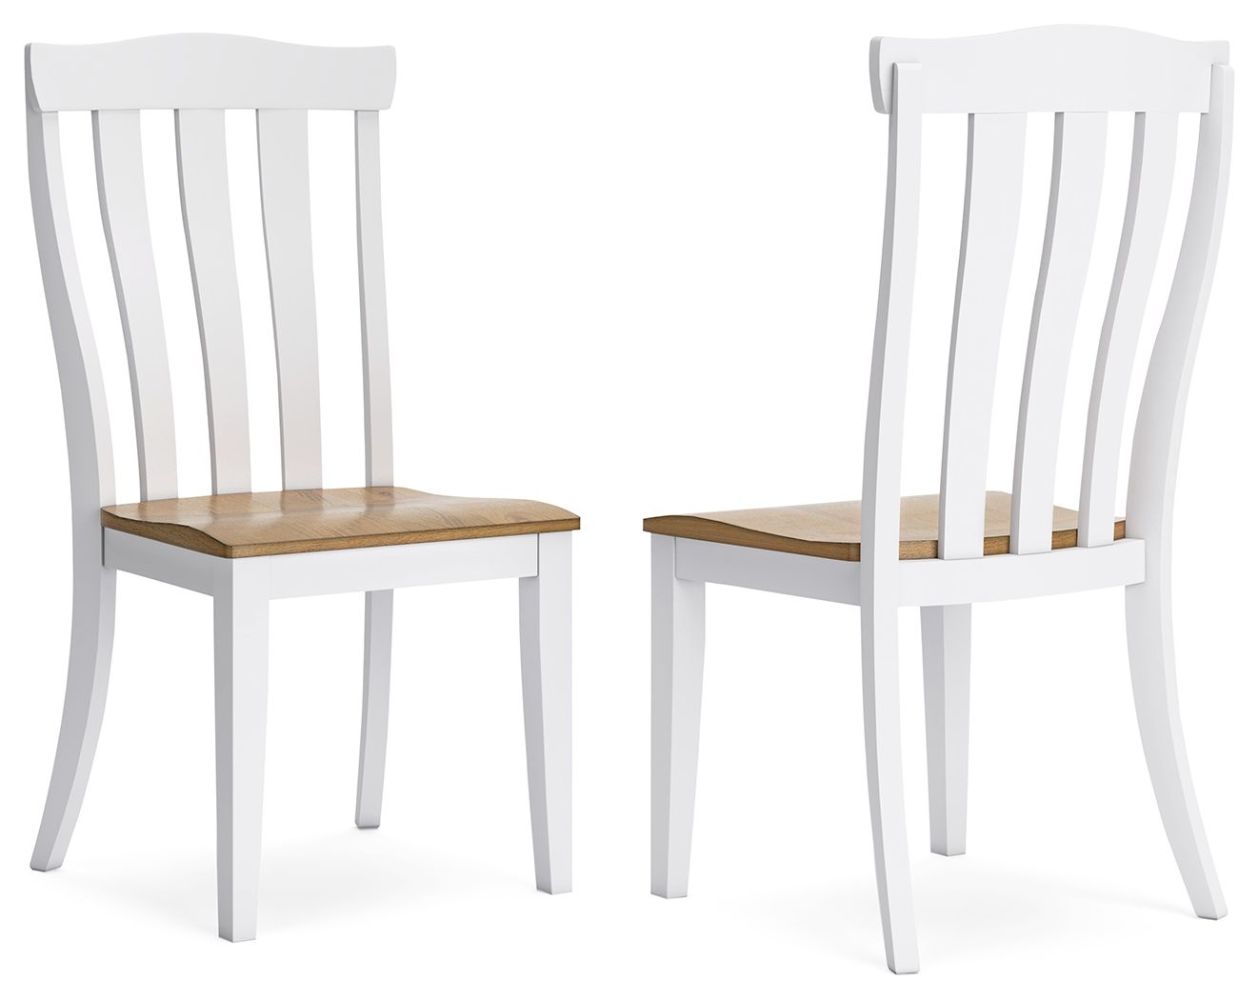 Ashbryn – White / Natural – 7 Pc. – Dining Table, 4 Side Chairs, Double Dining Chair, Server D844/25/01(2)/08/60